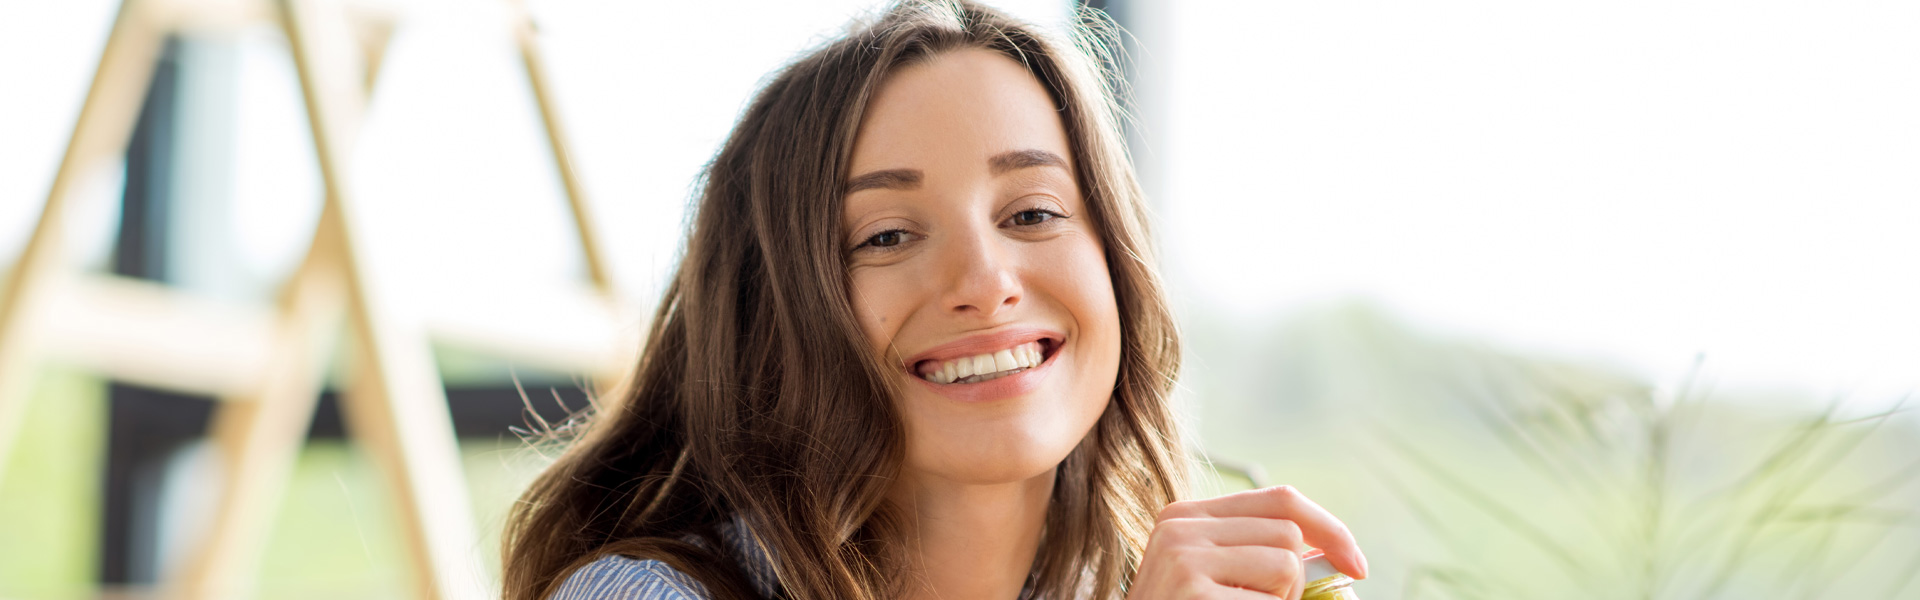 Does A Frenectomy Change Your Smile?